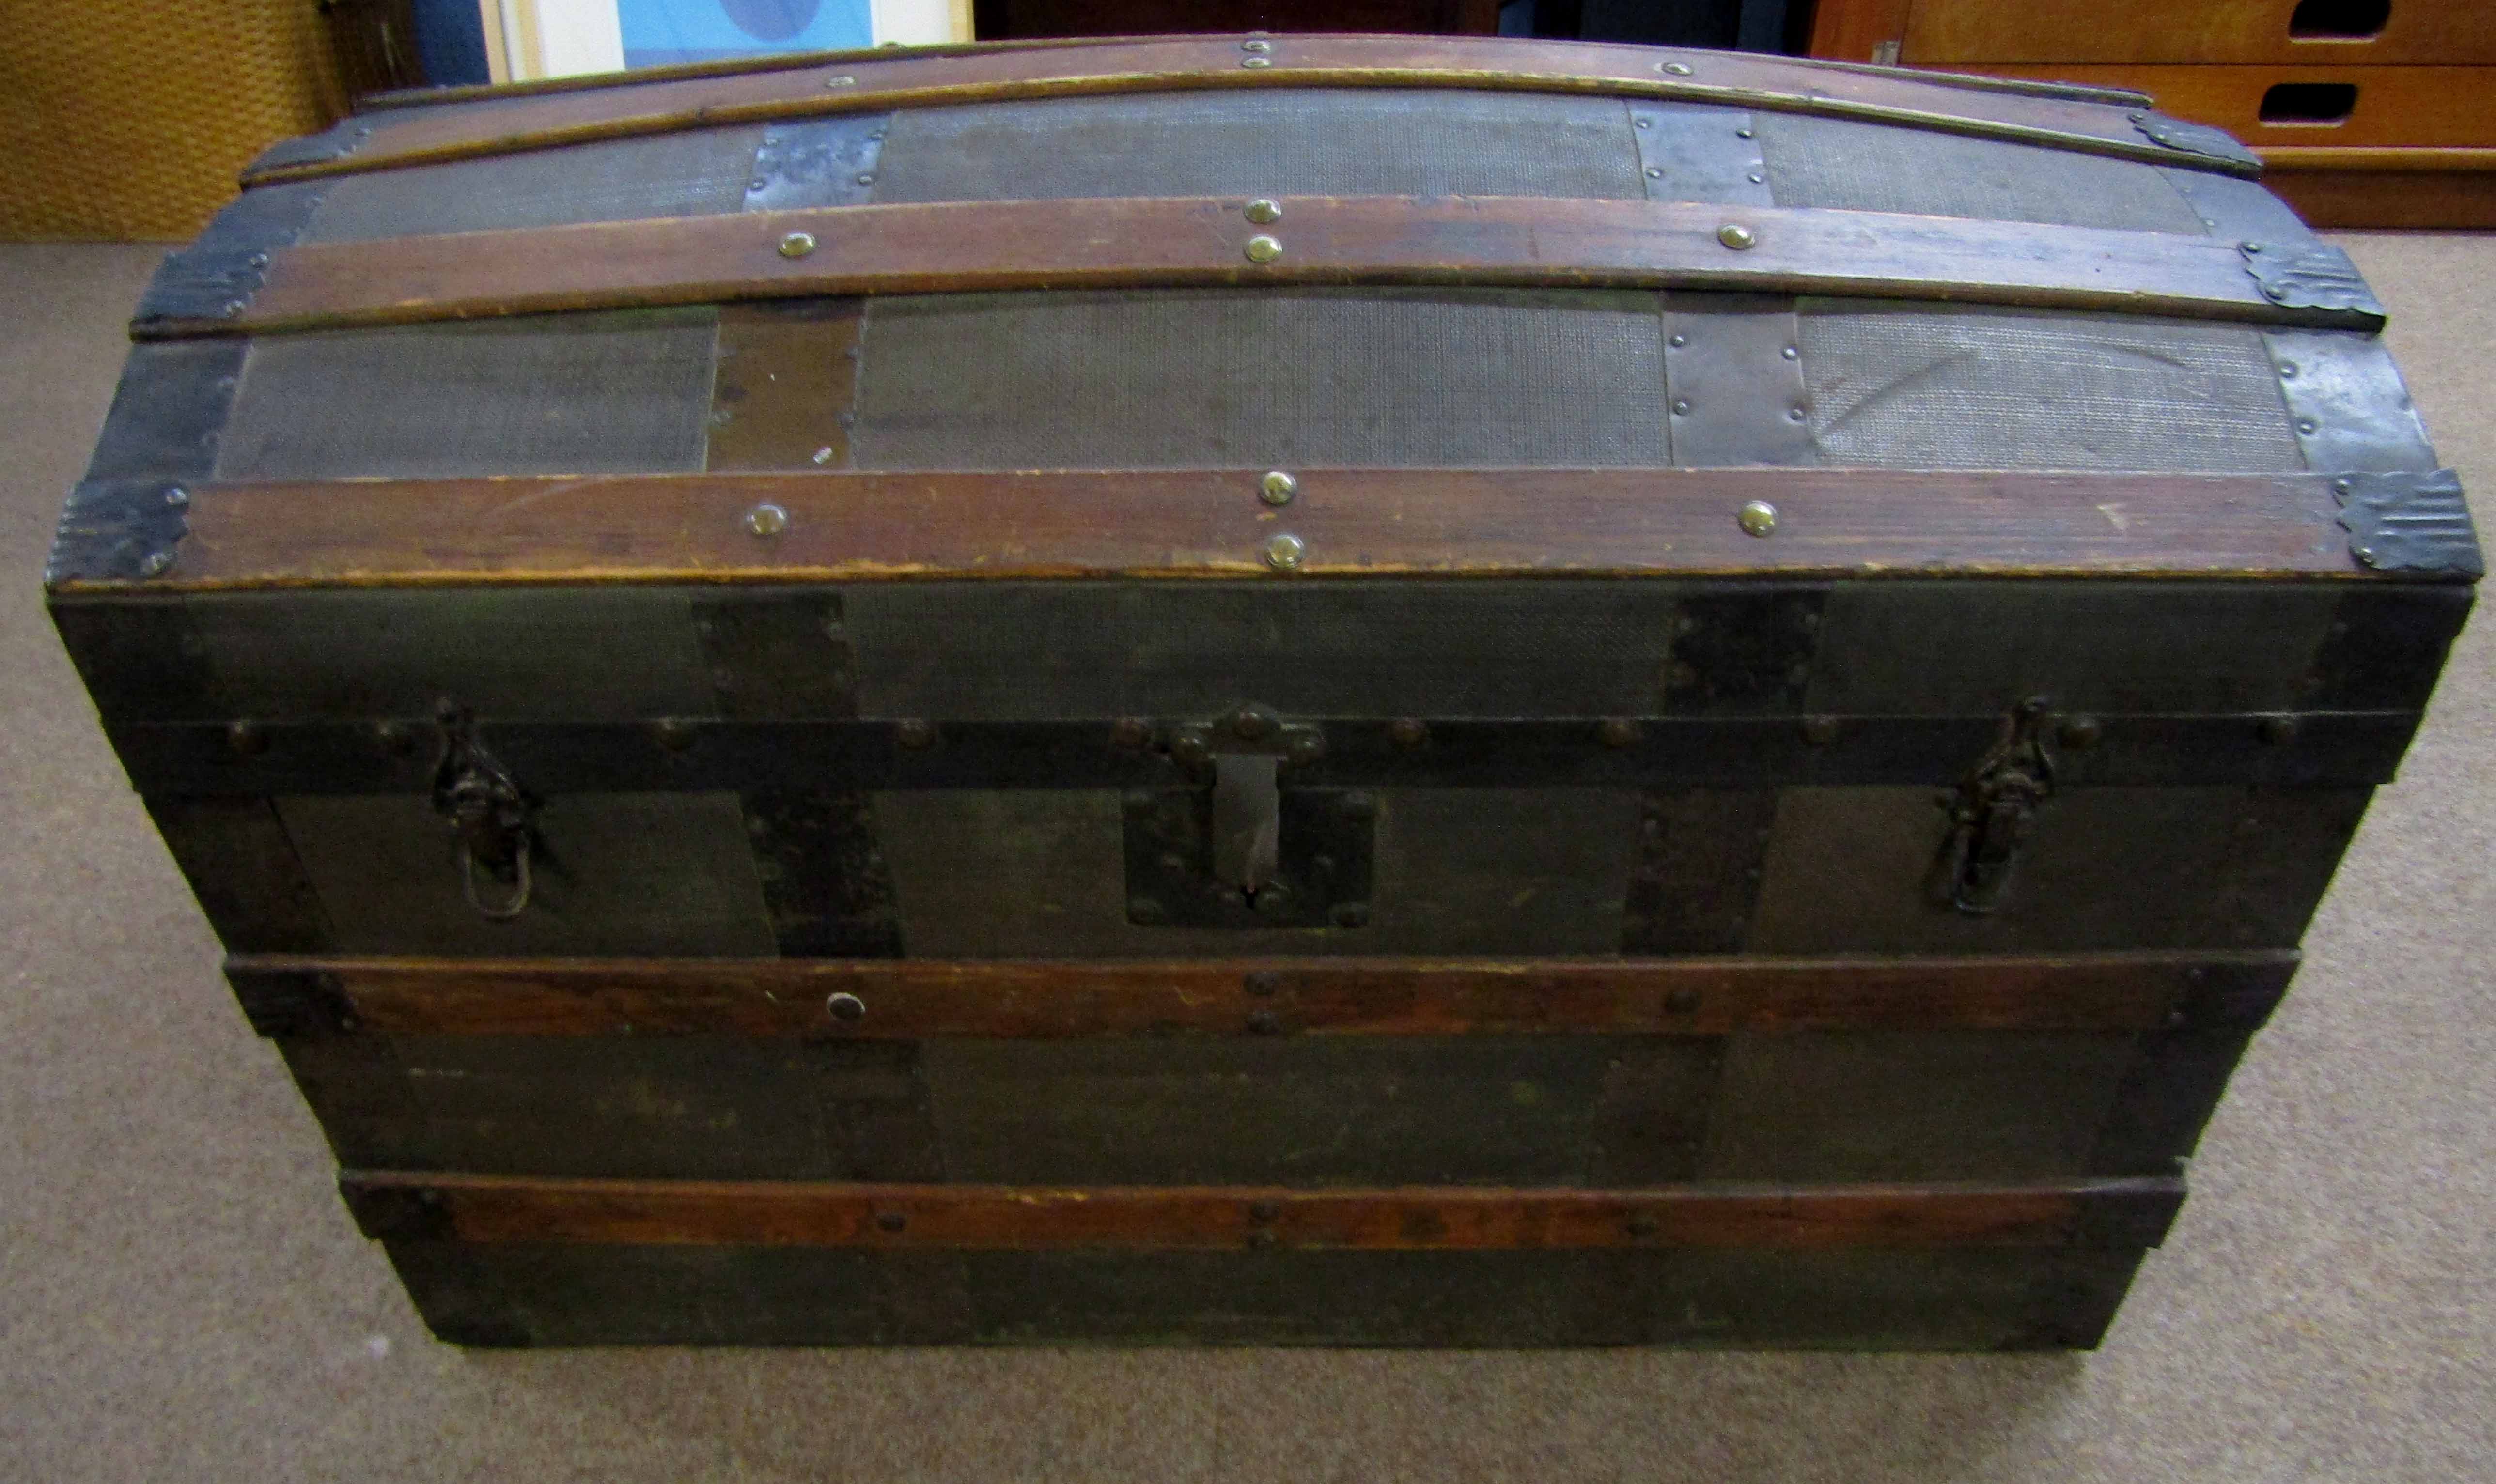 Early 20th century pine banded domed top trunk with metal strapwork and mounts, 87cm long - Image 2 of 2